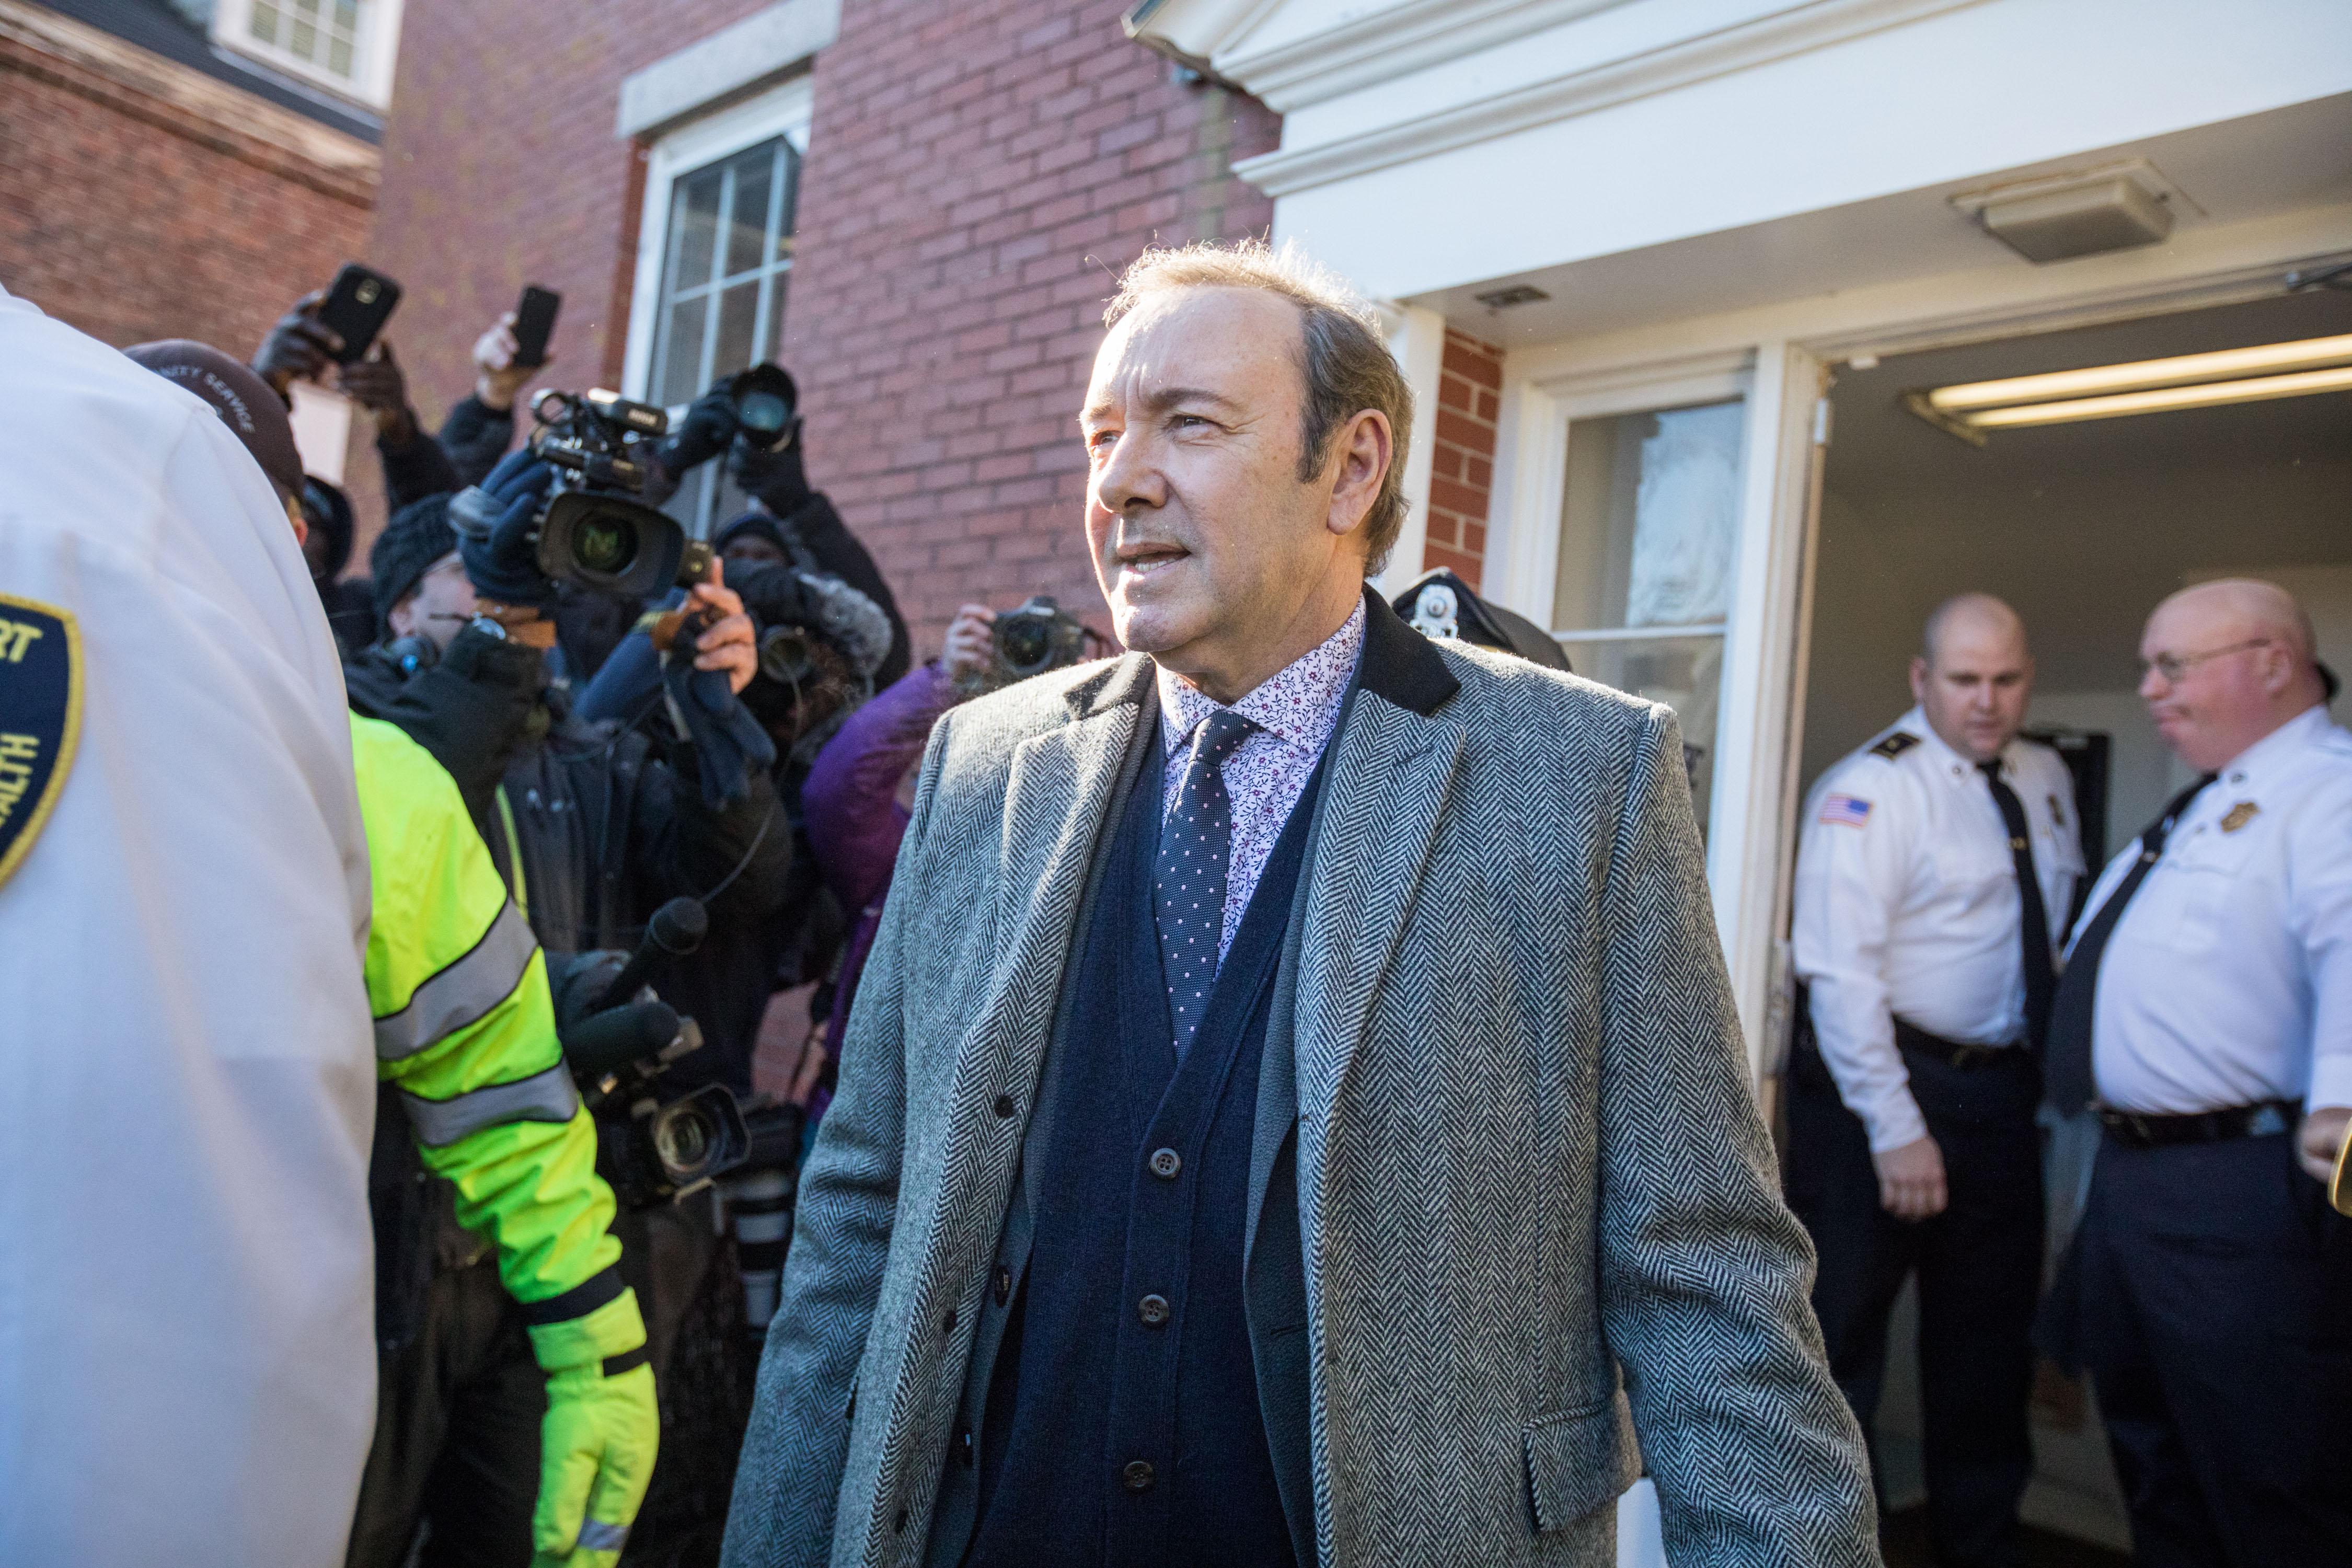 Kevin Spacey is not in jail in 2020